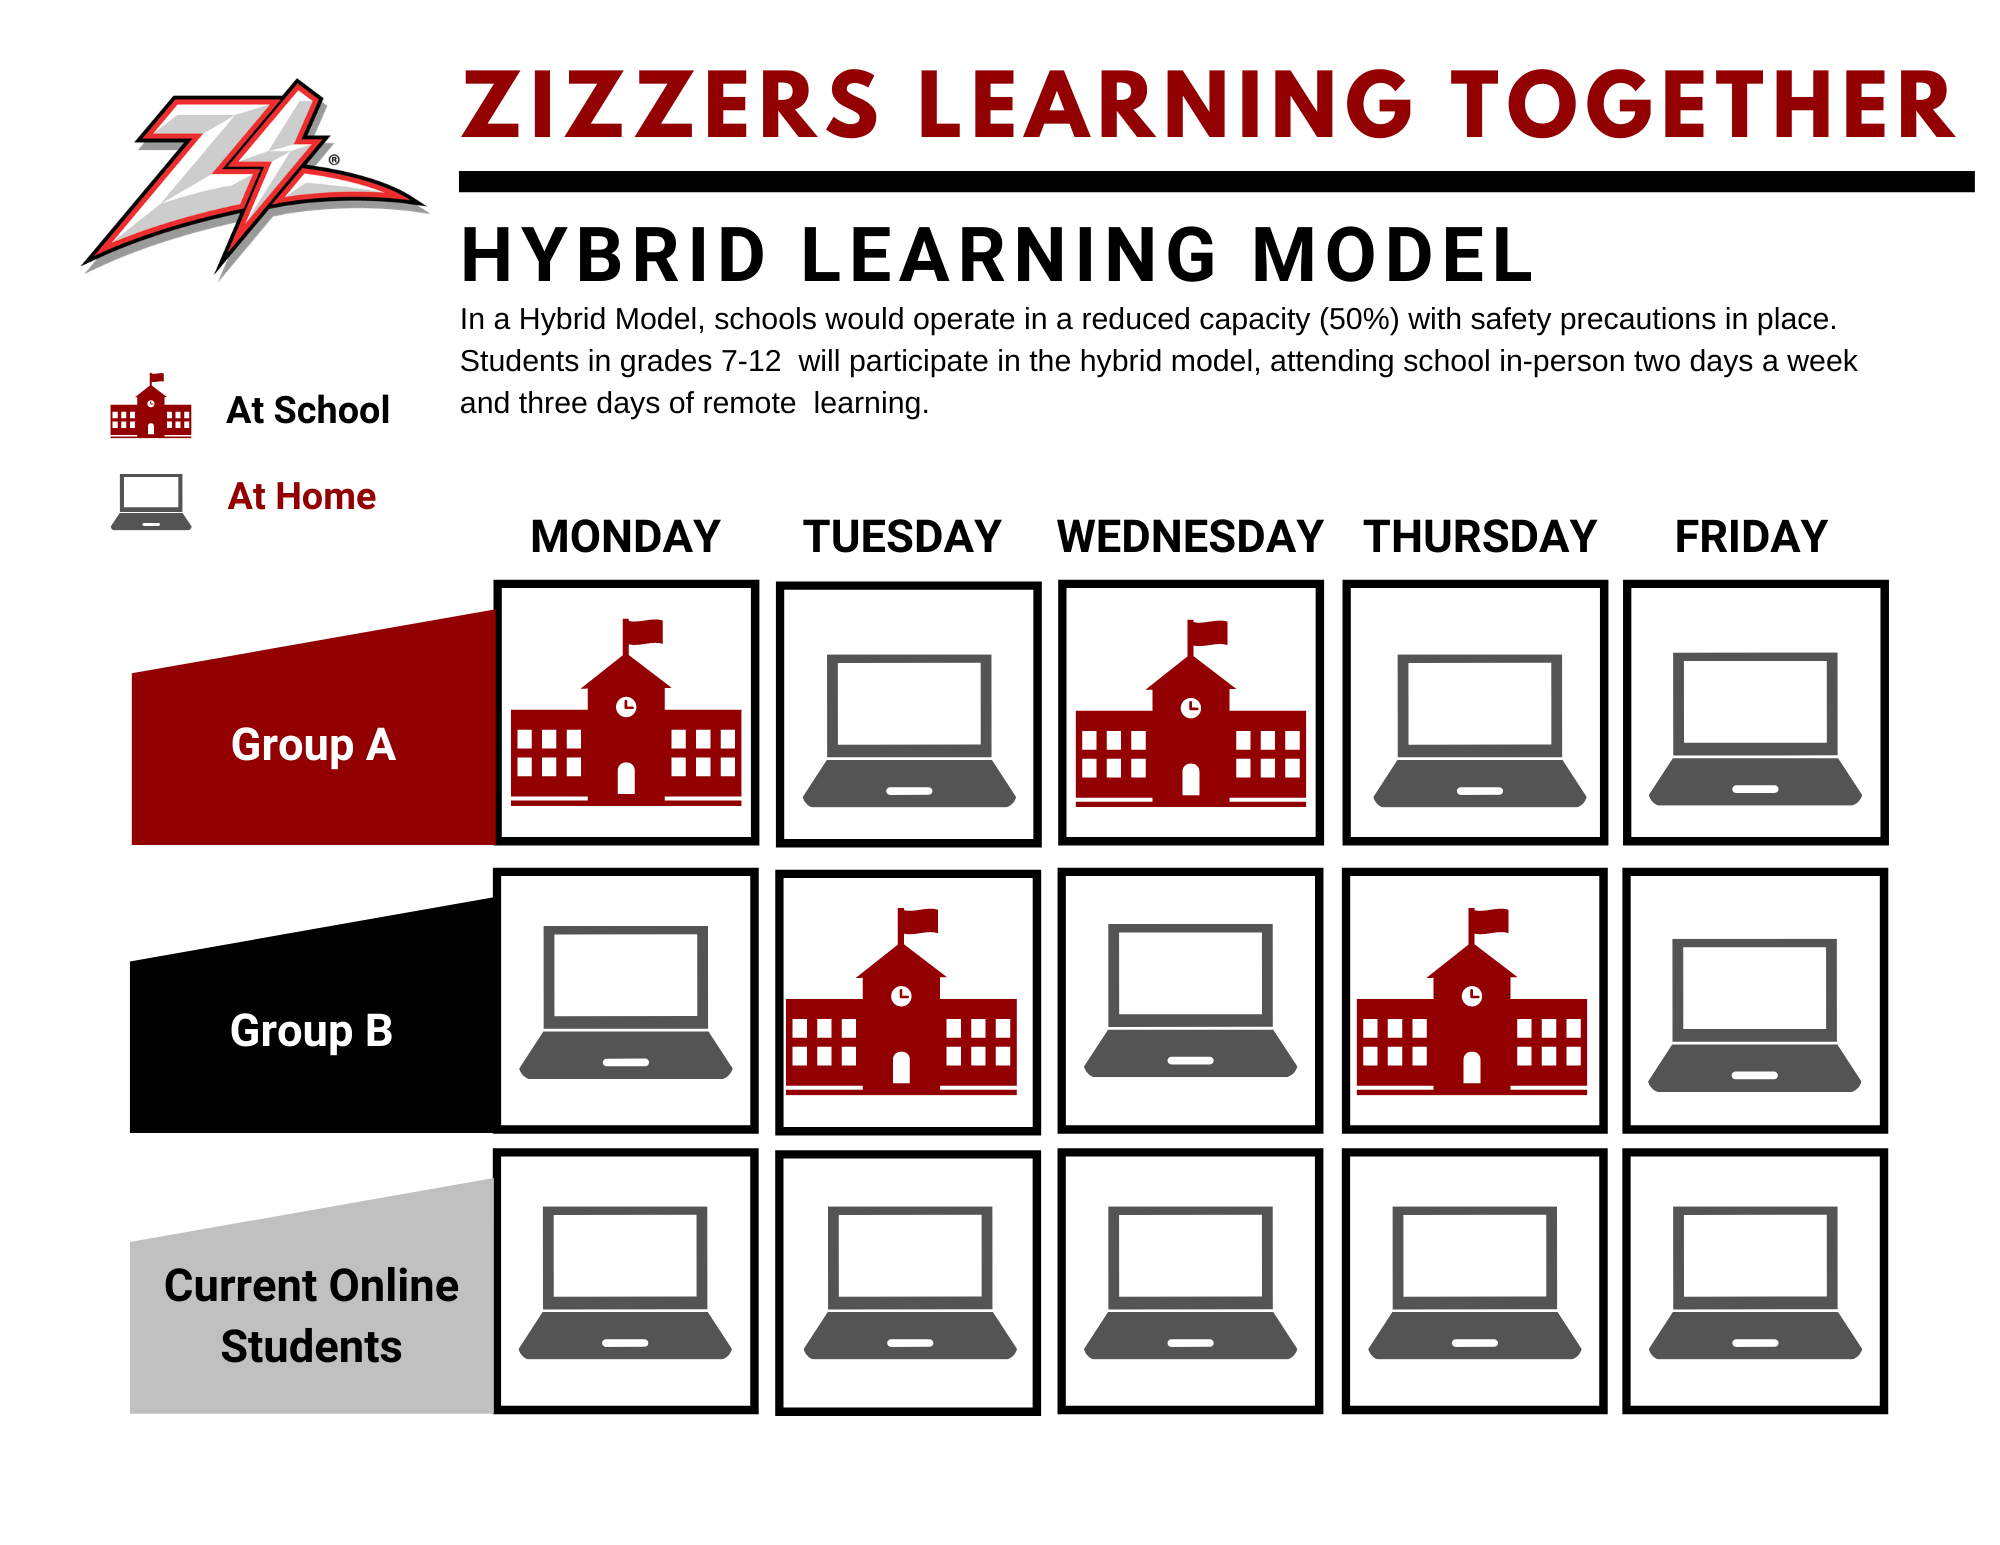 West Plains Schools will move to a hybrid learning model for students